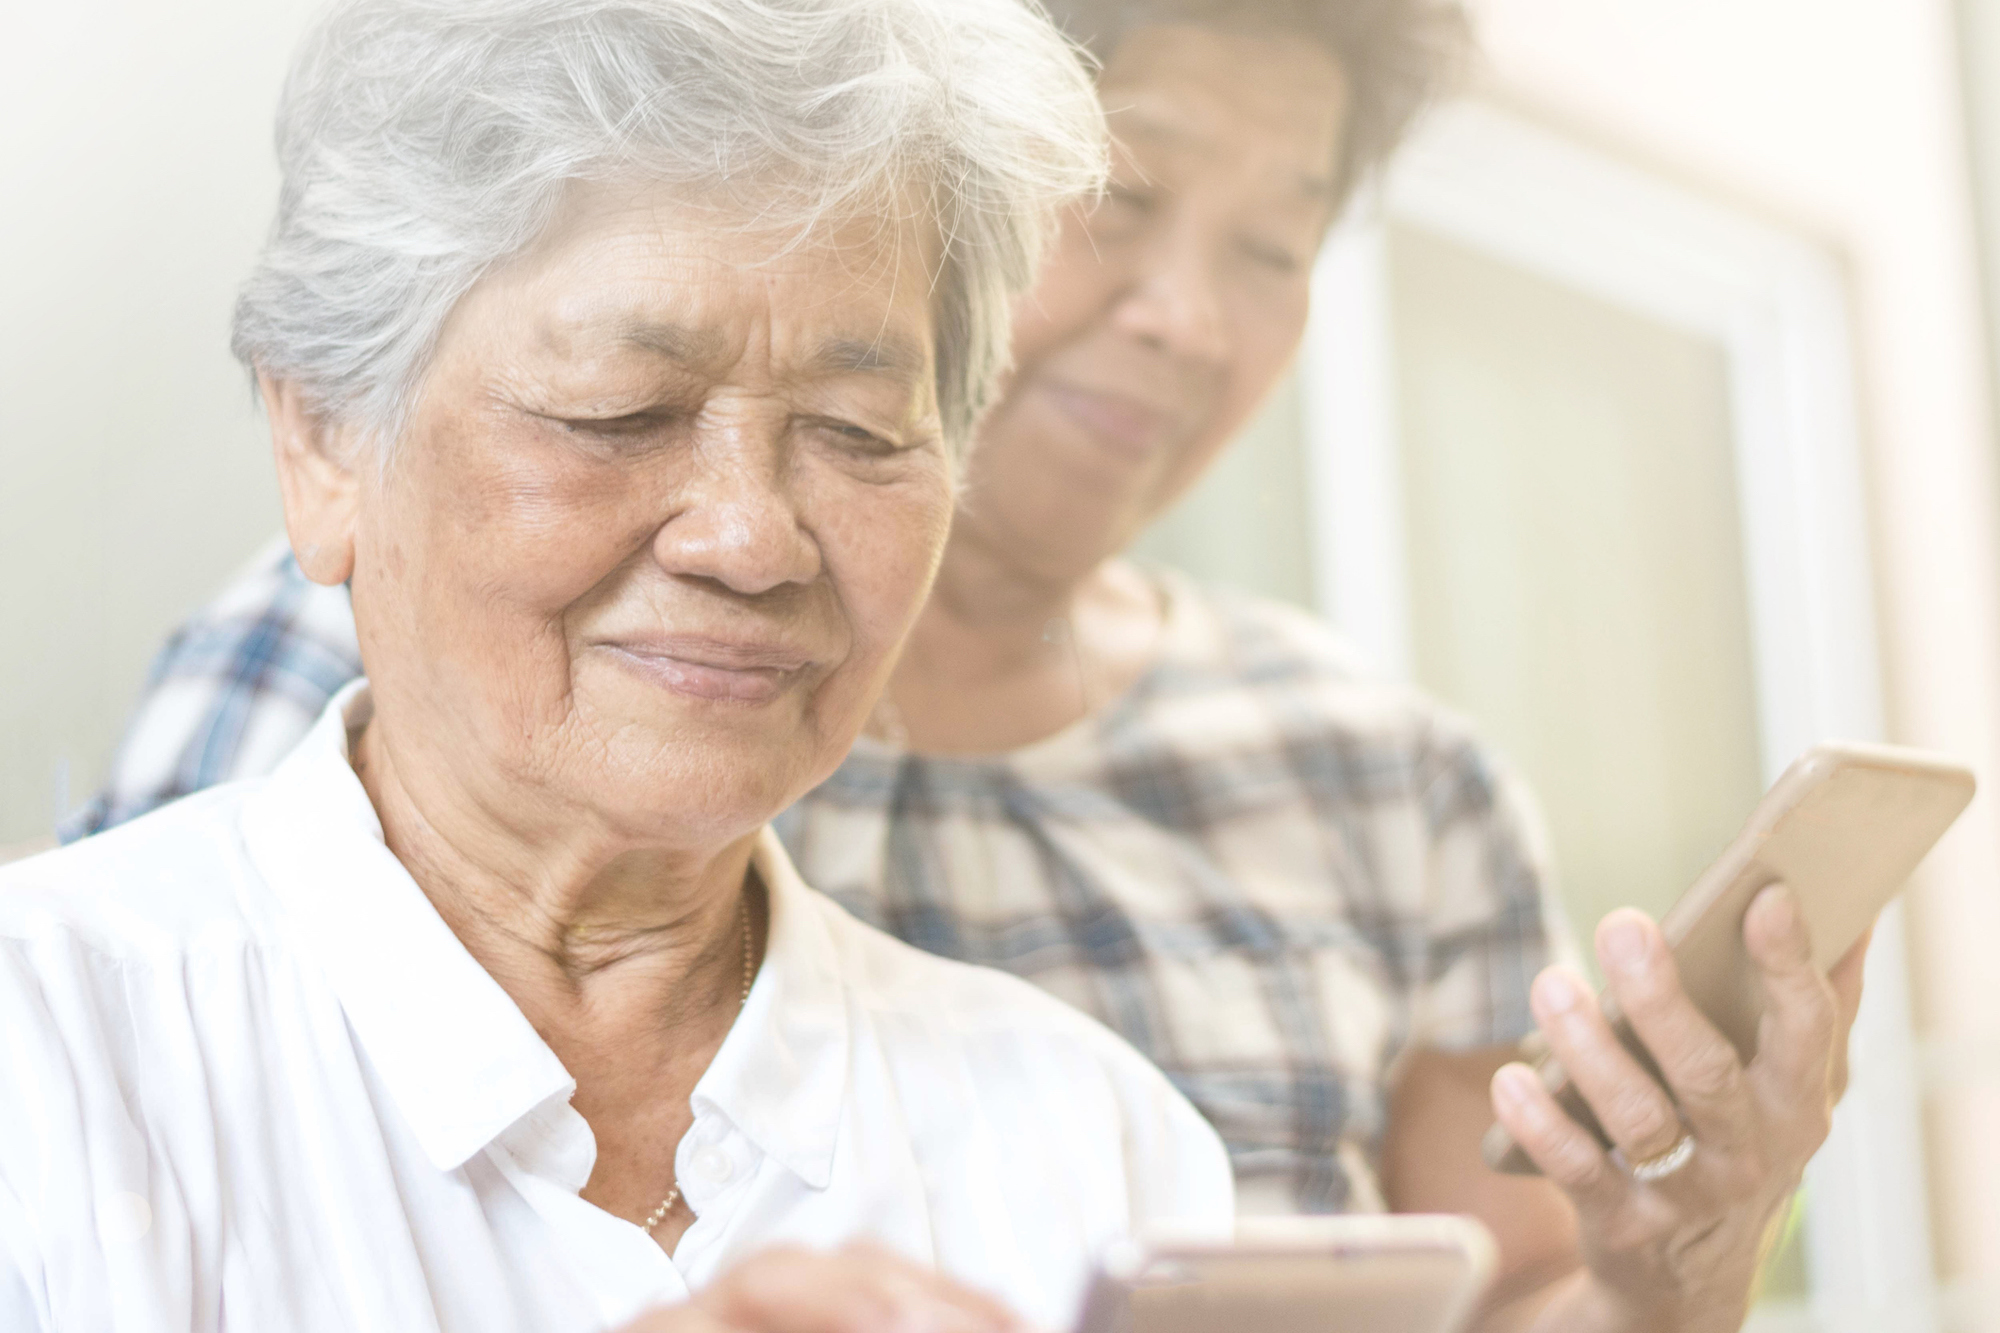 Senior Asian woman with white hair and a white blouse is helped by a caregiver, who supports her from behind. They are both on their phones, trying to read what's on the screen.